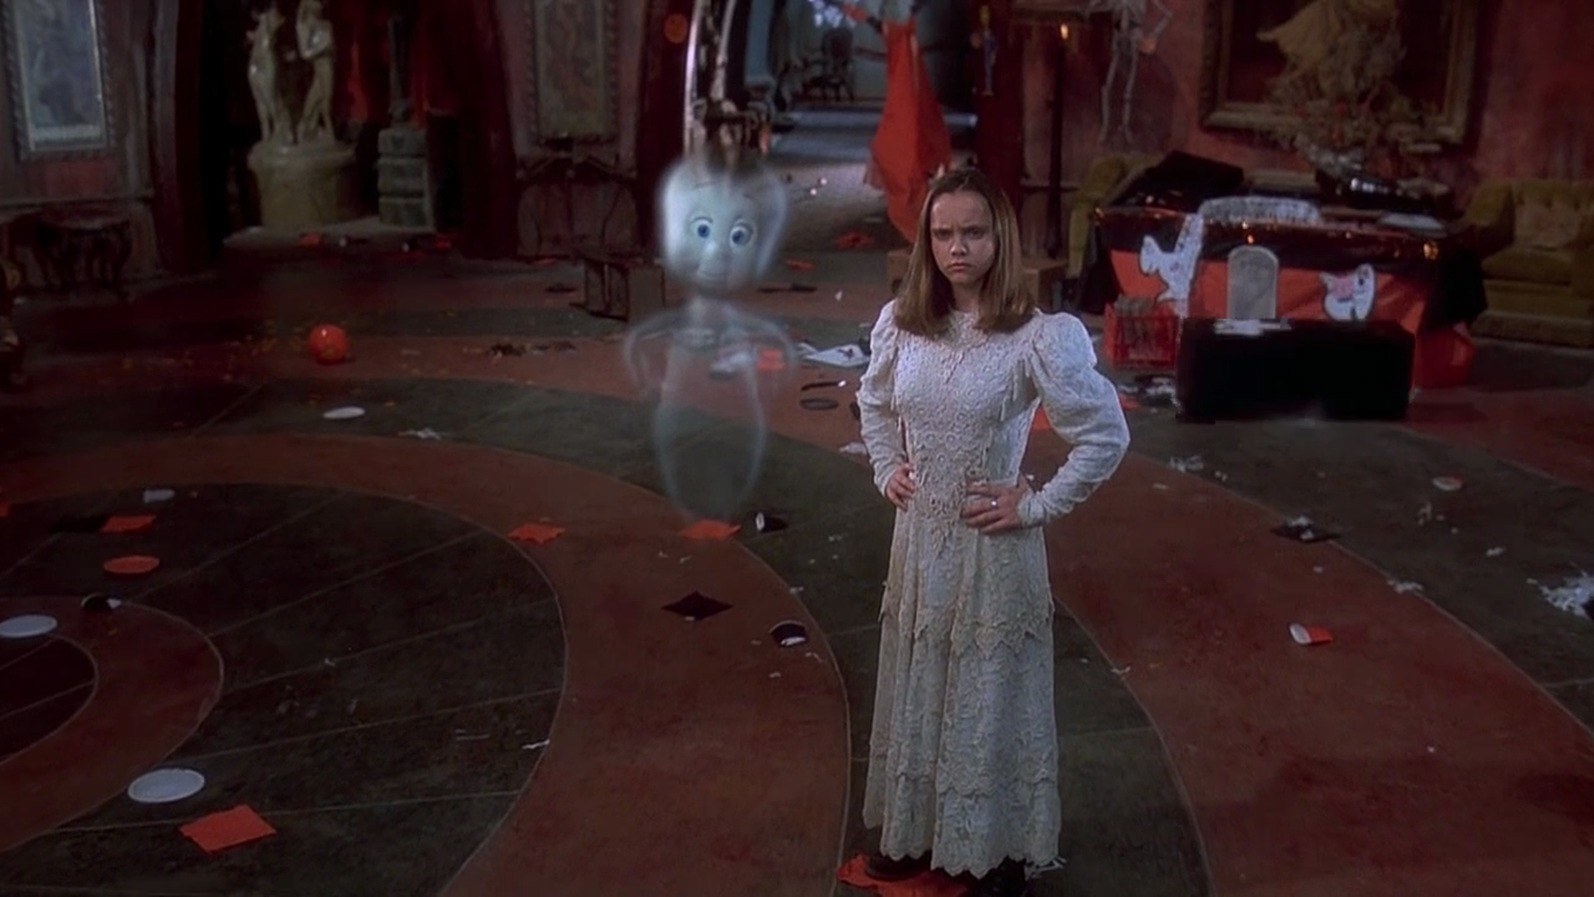 Kat in a white dress next to Casper the friendly ghost